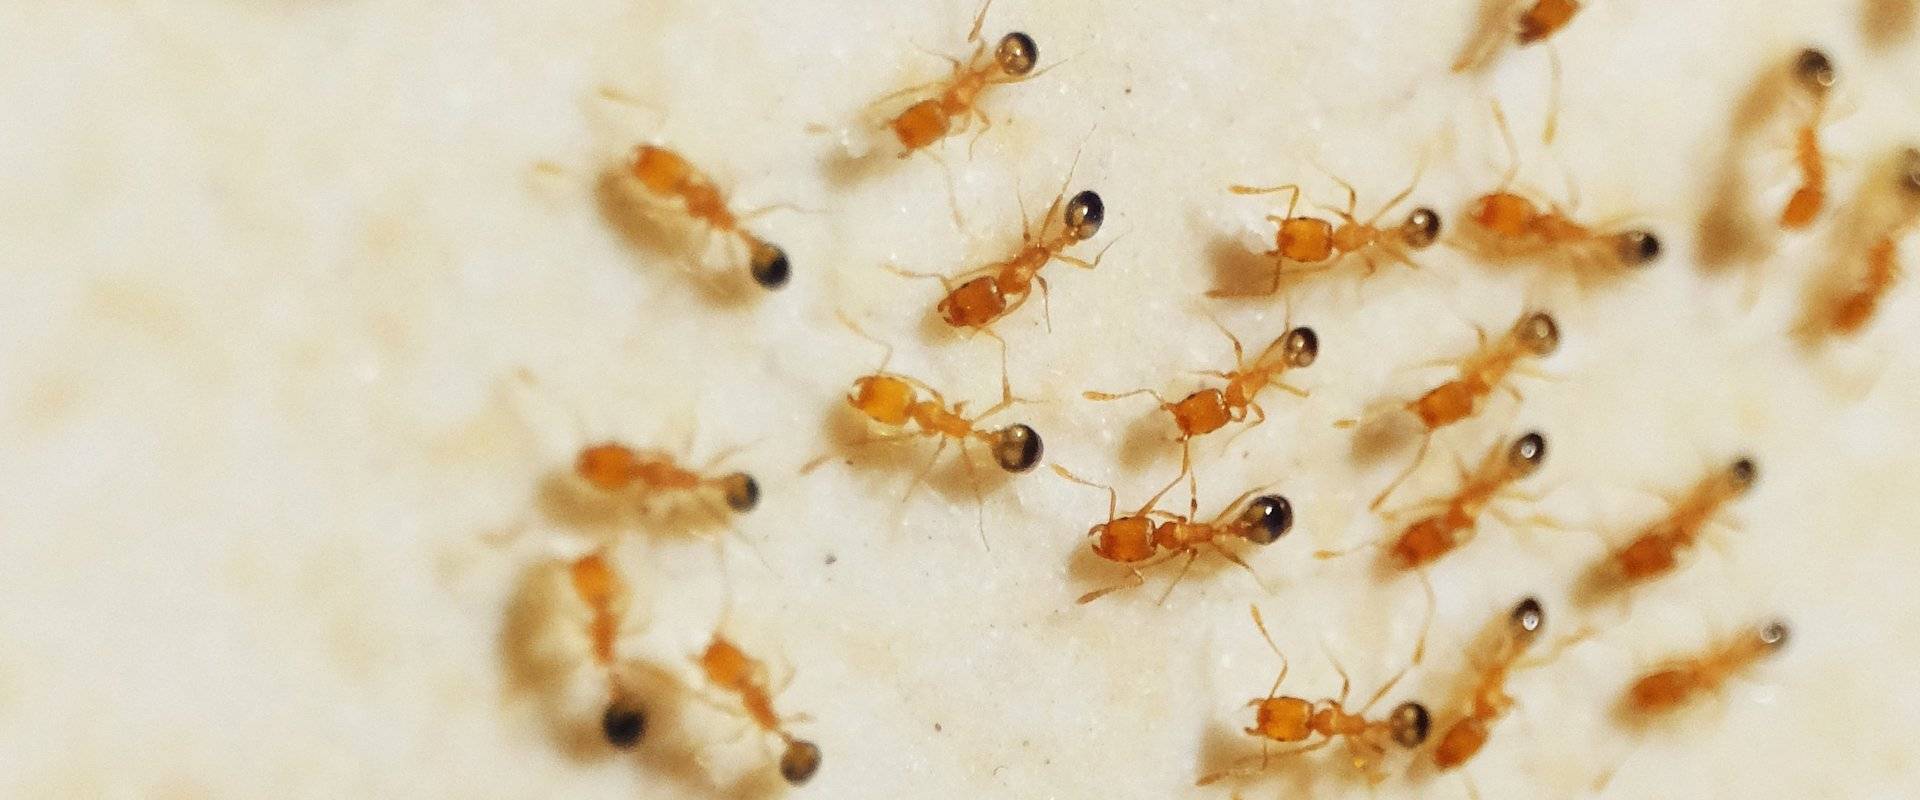 pharaoh ants crawling in a home